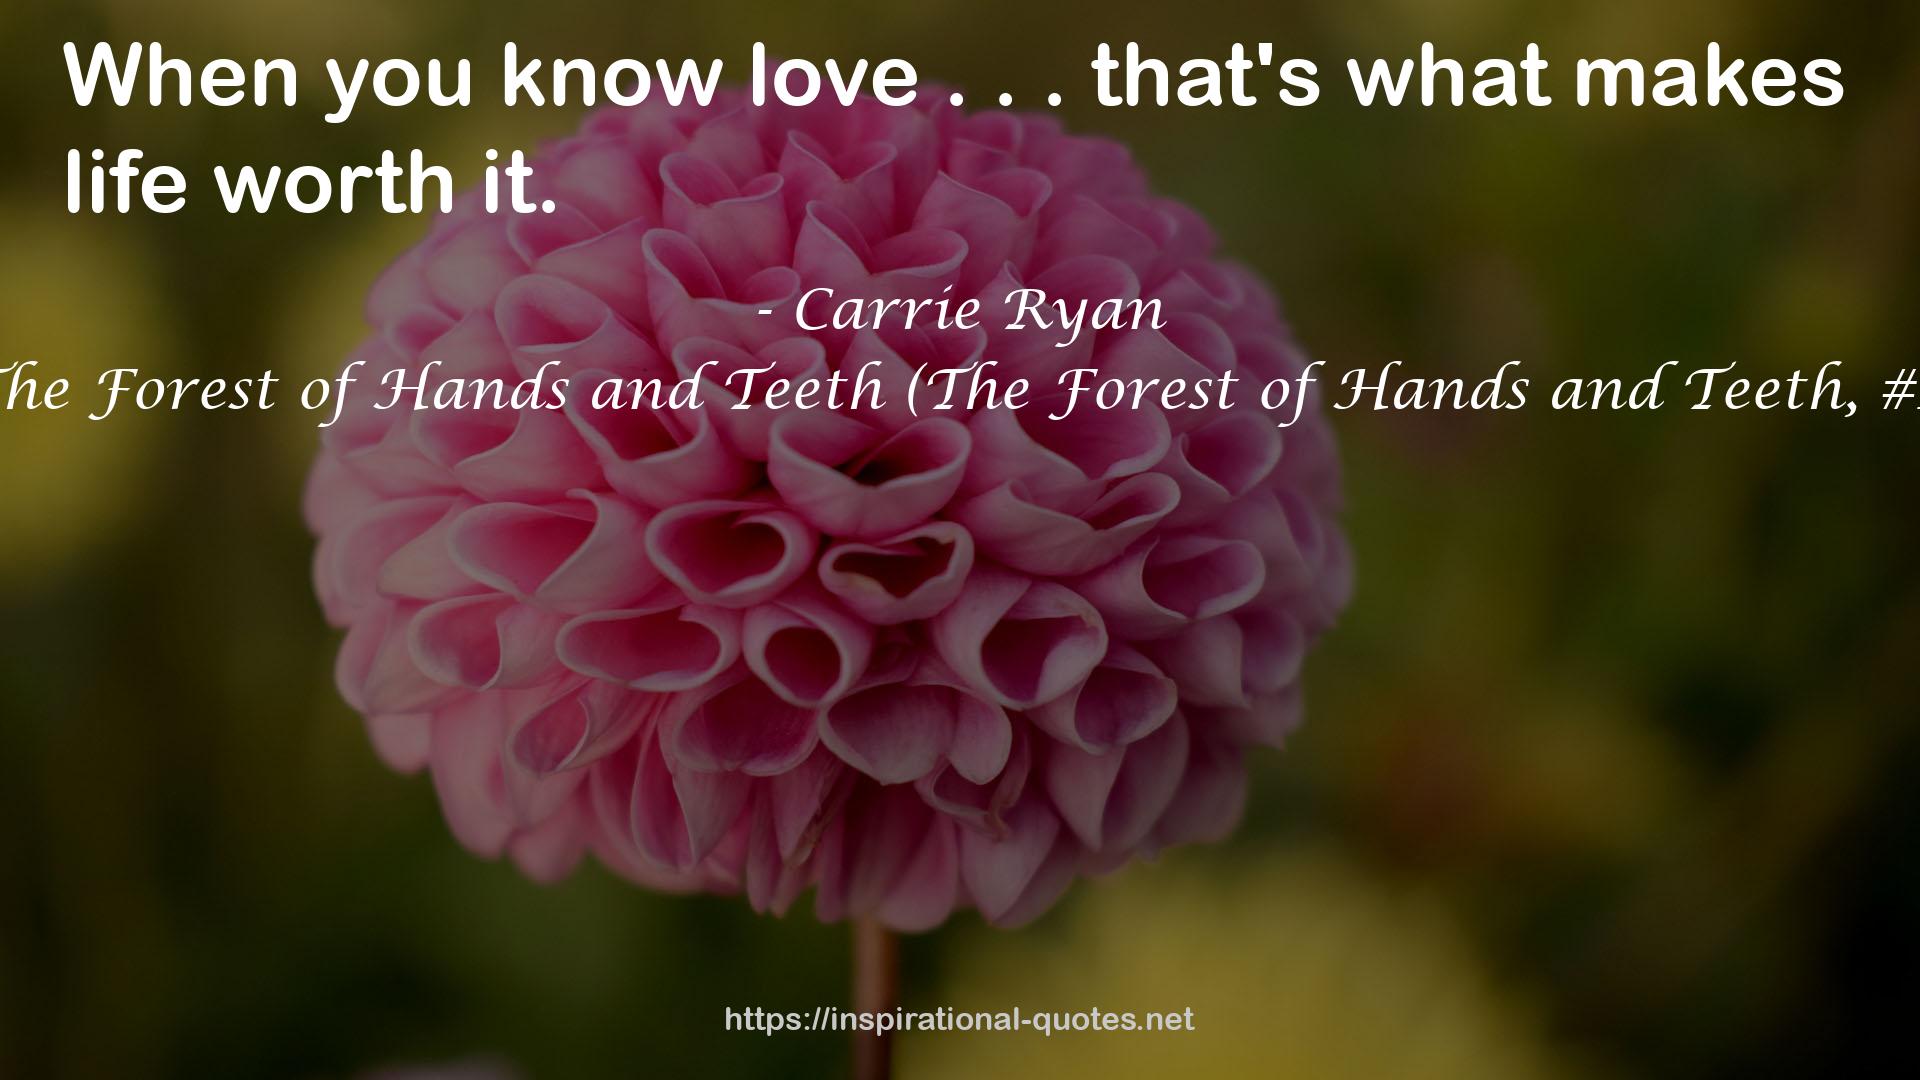 The Forest of Hands and Teeth (The Forest of Hands and Teeth, #1) QUOTES